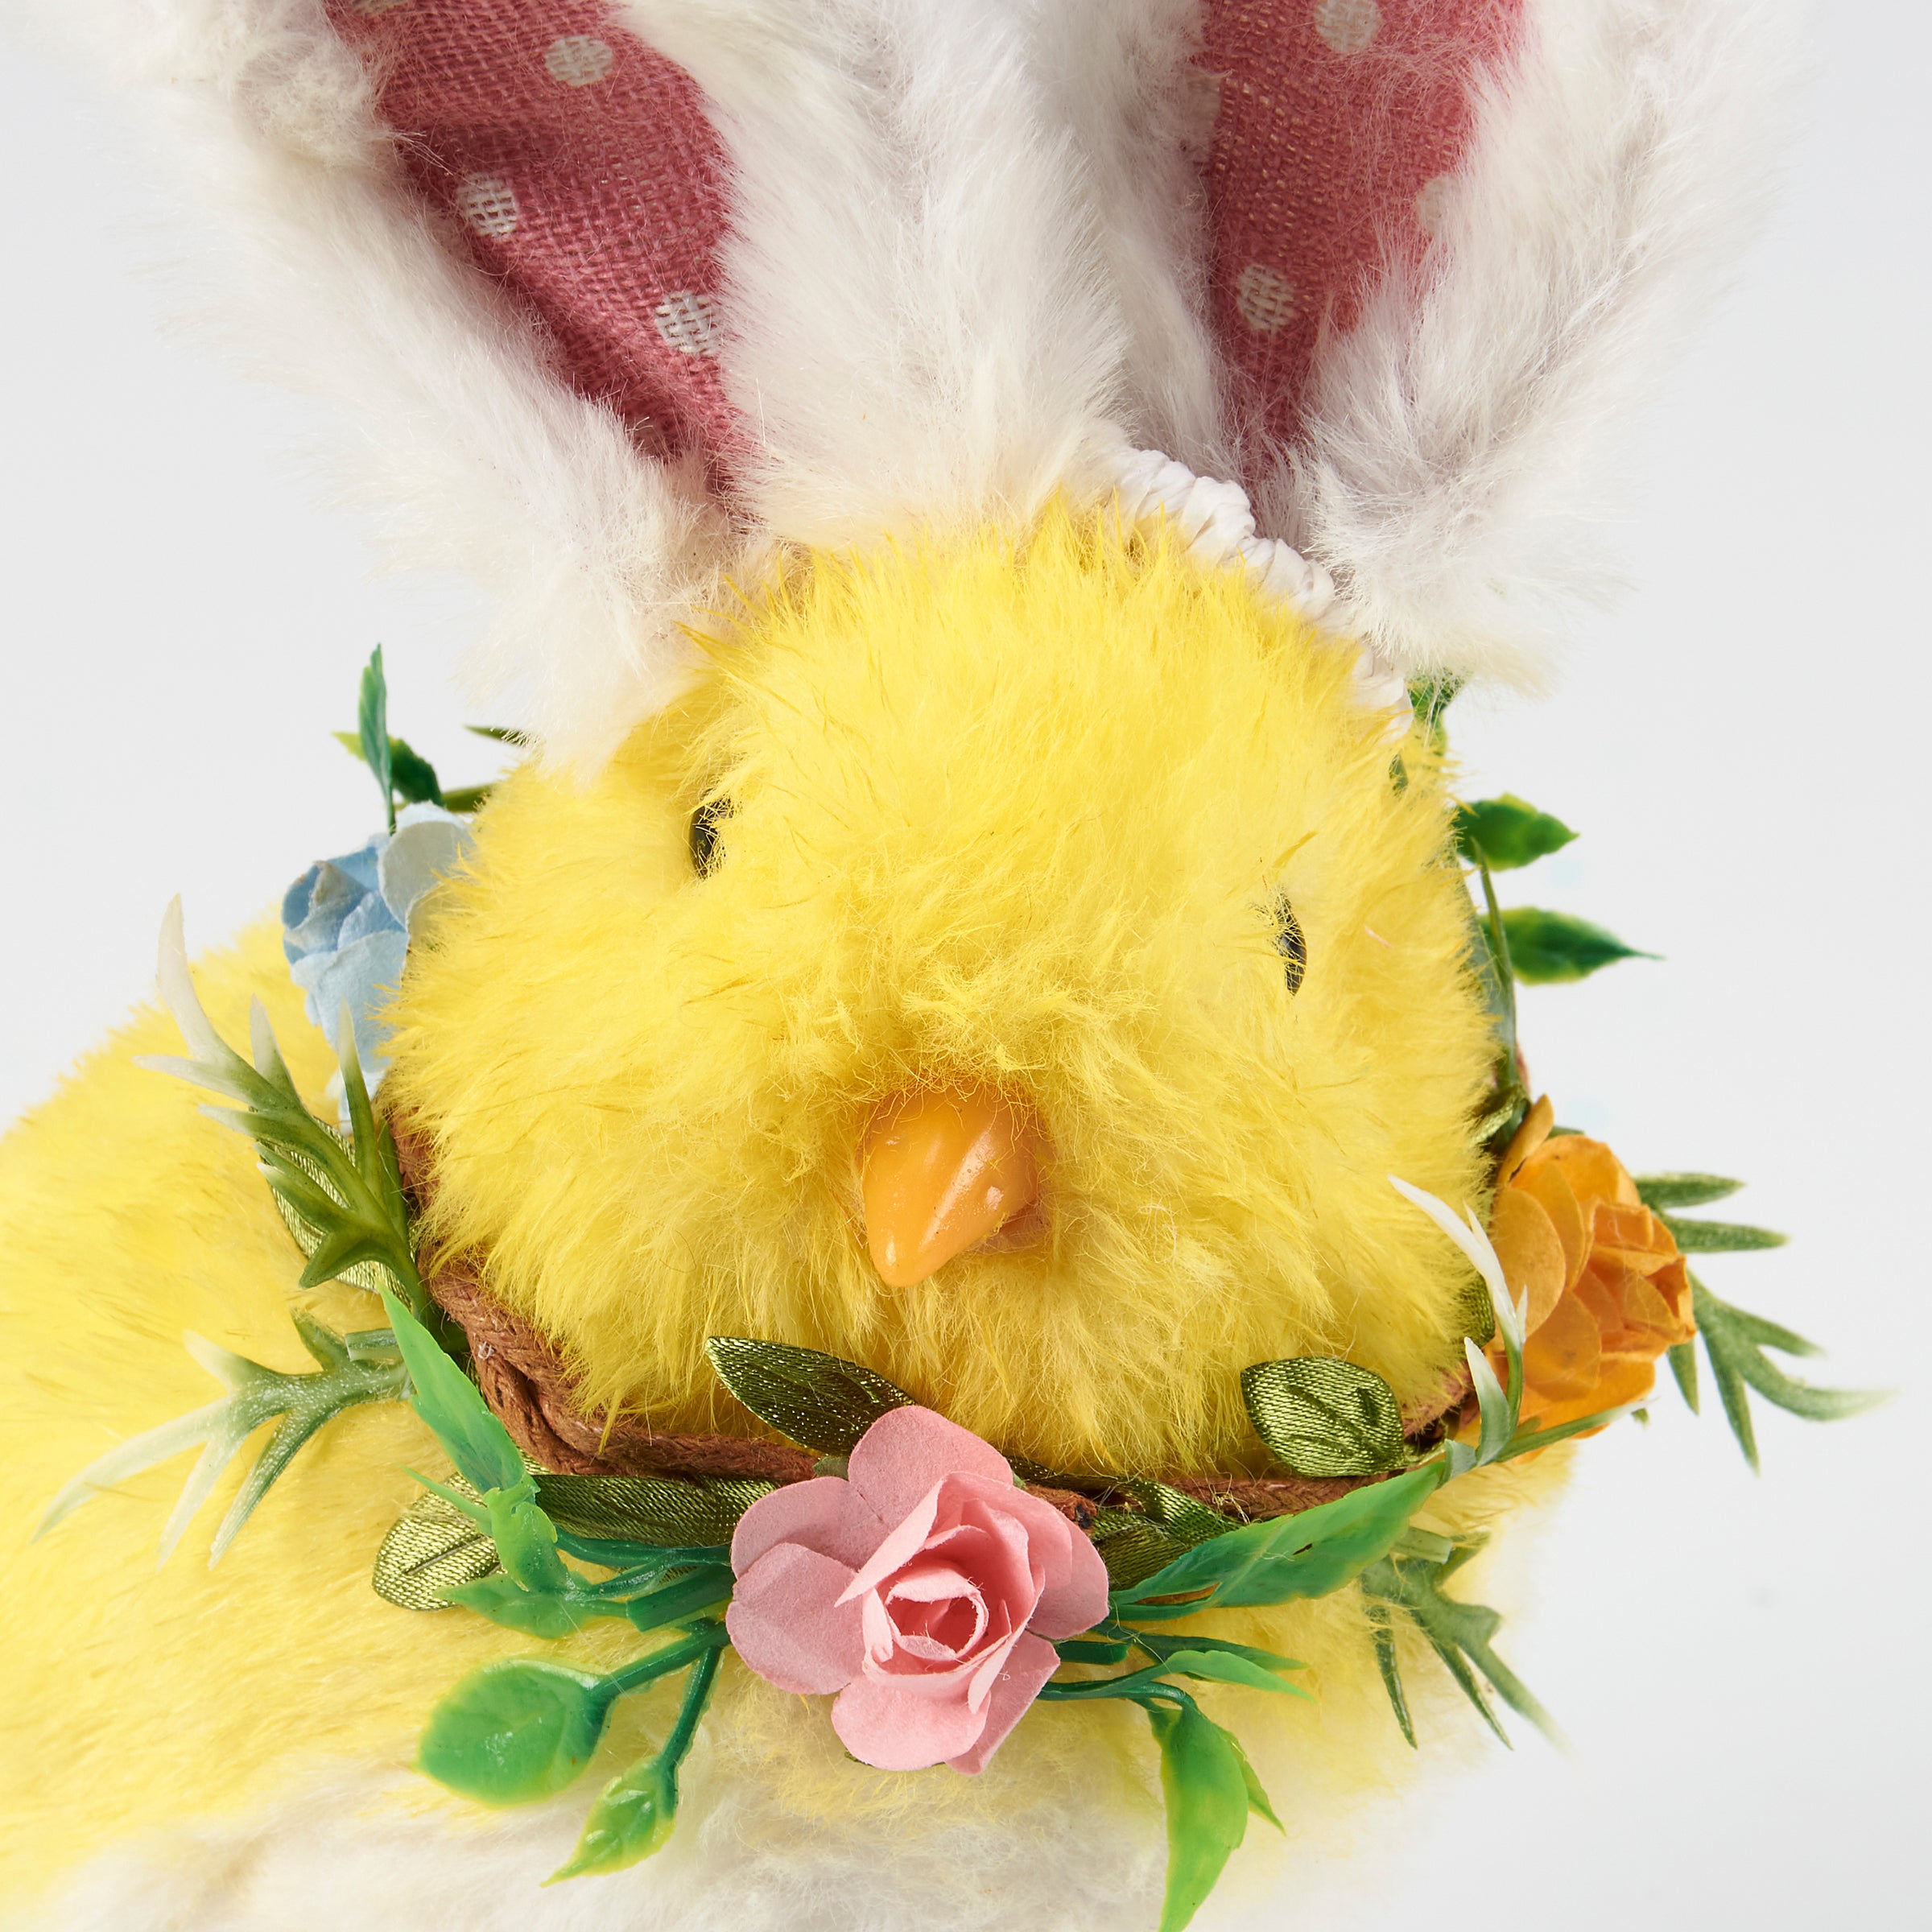 Easter Spring Farmhouse Chick w/ Bunny Ears and Flower Wreath